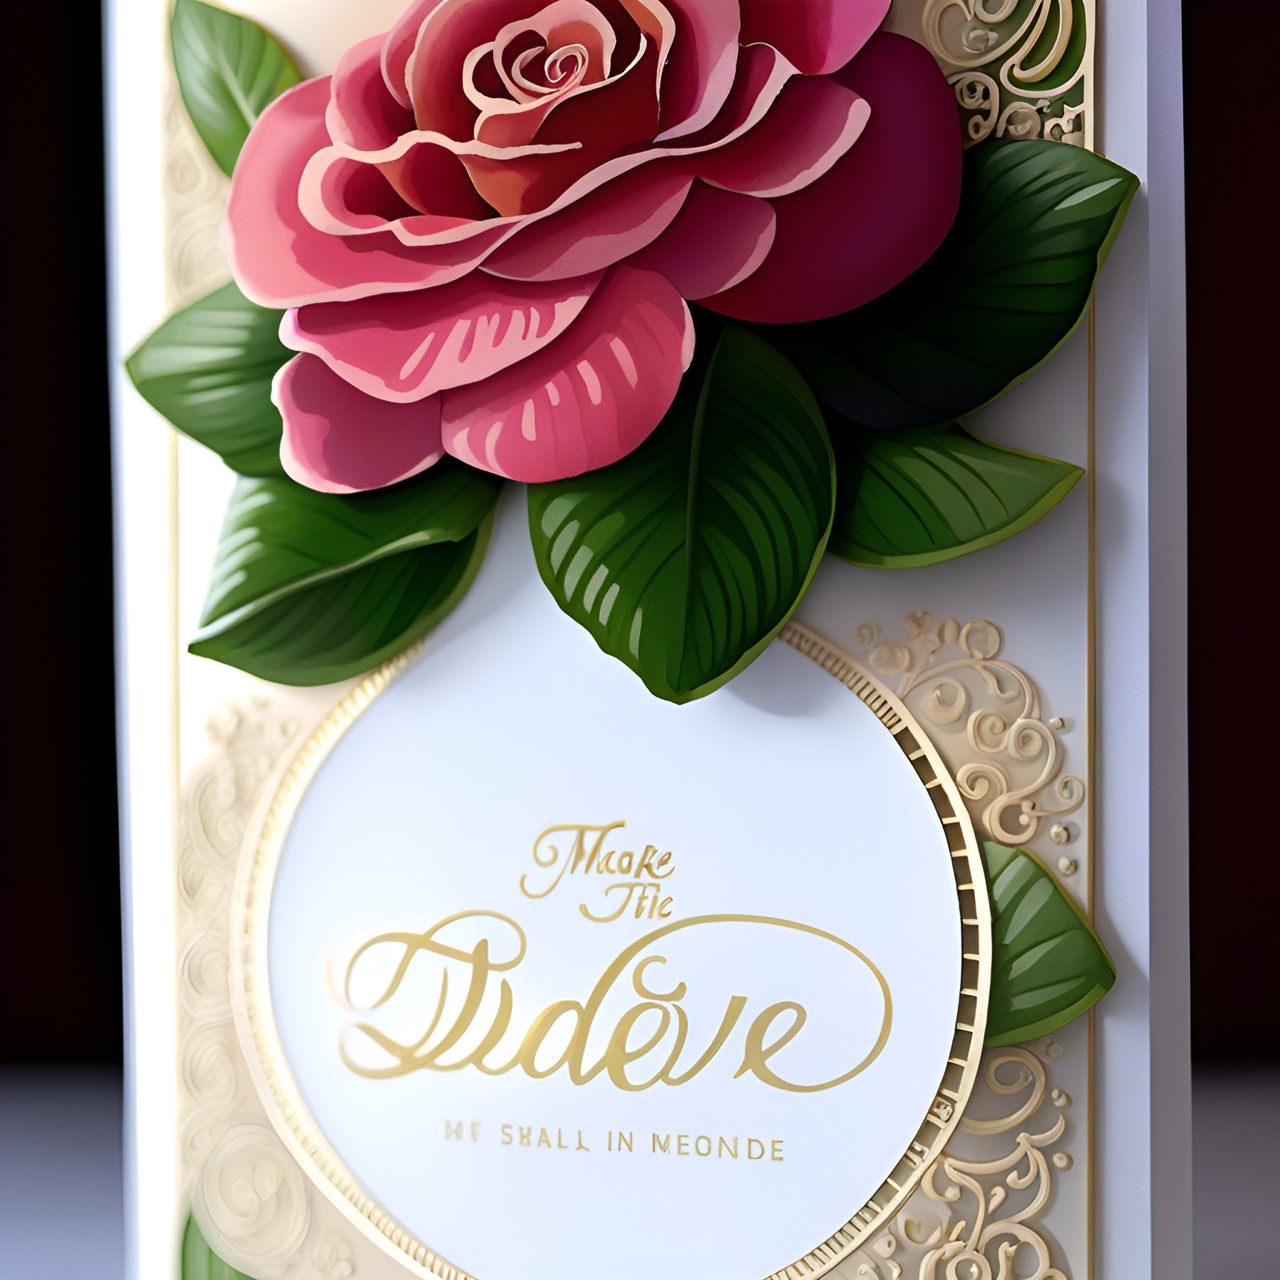 Forever wedding cards pinterest preview image.